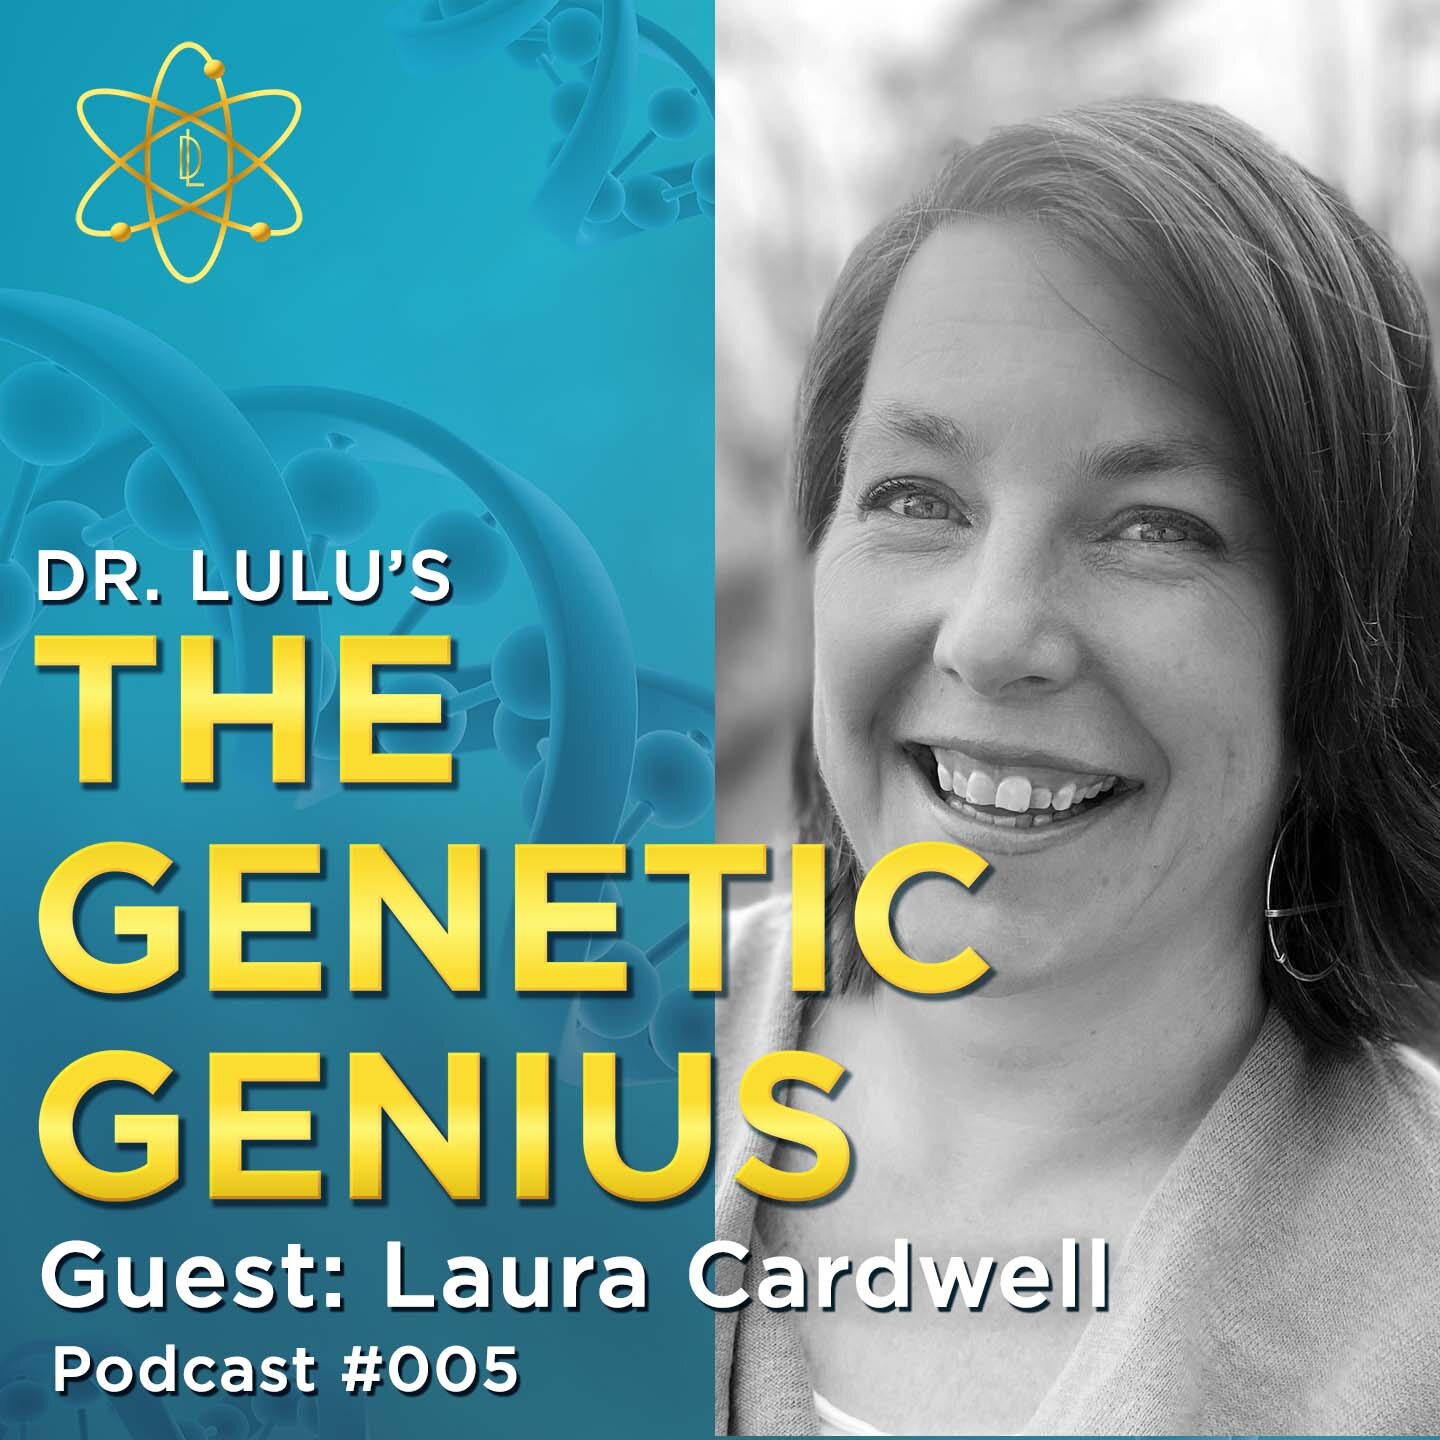 THE INNER WORKINGS OF THE BRAIN WITH LAURA CARDWELL